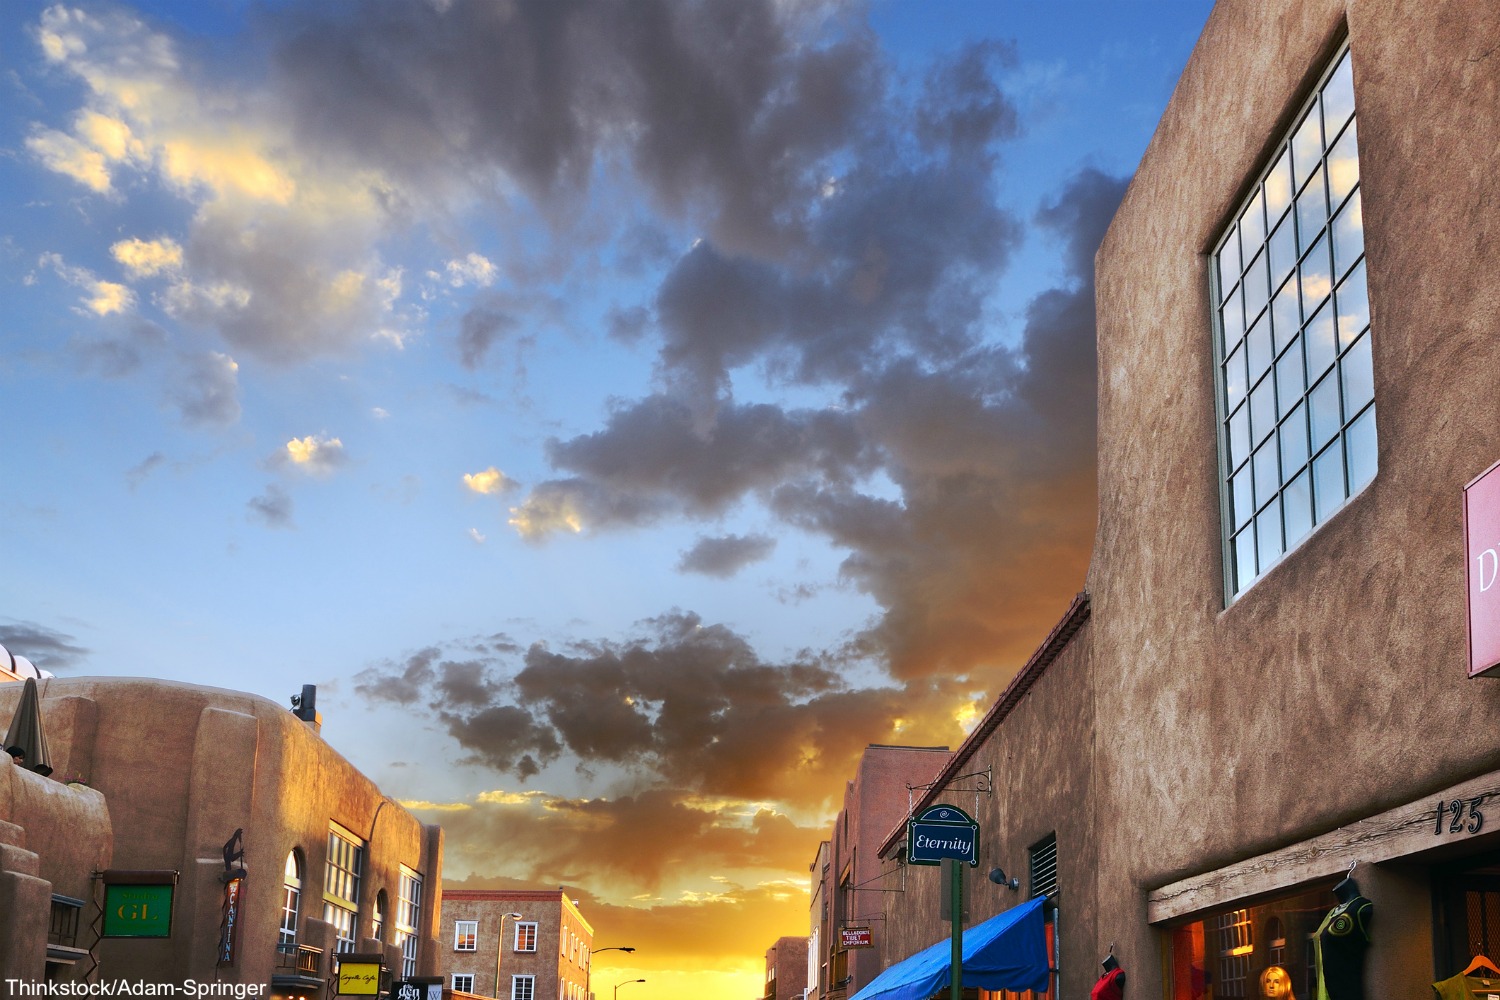 What to See in Santa Fe